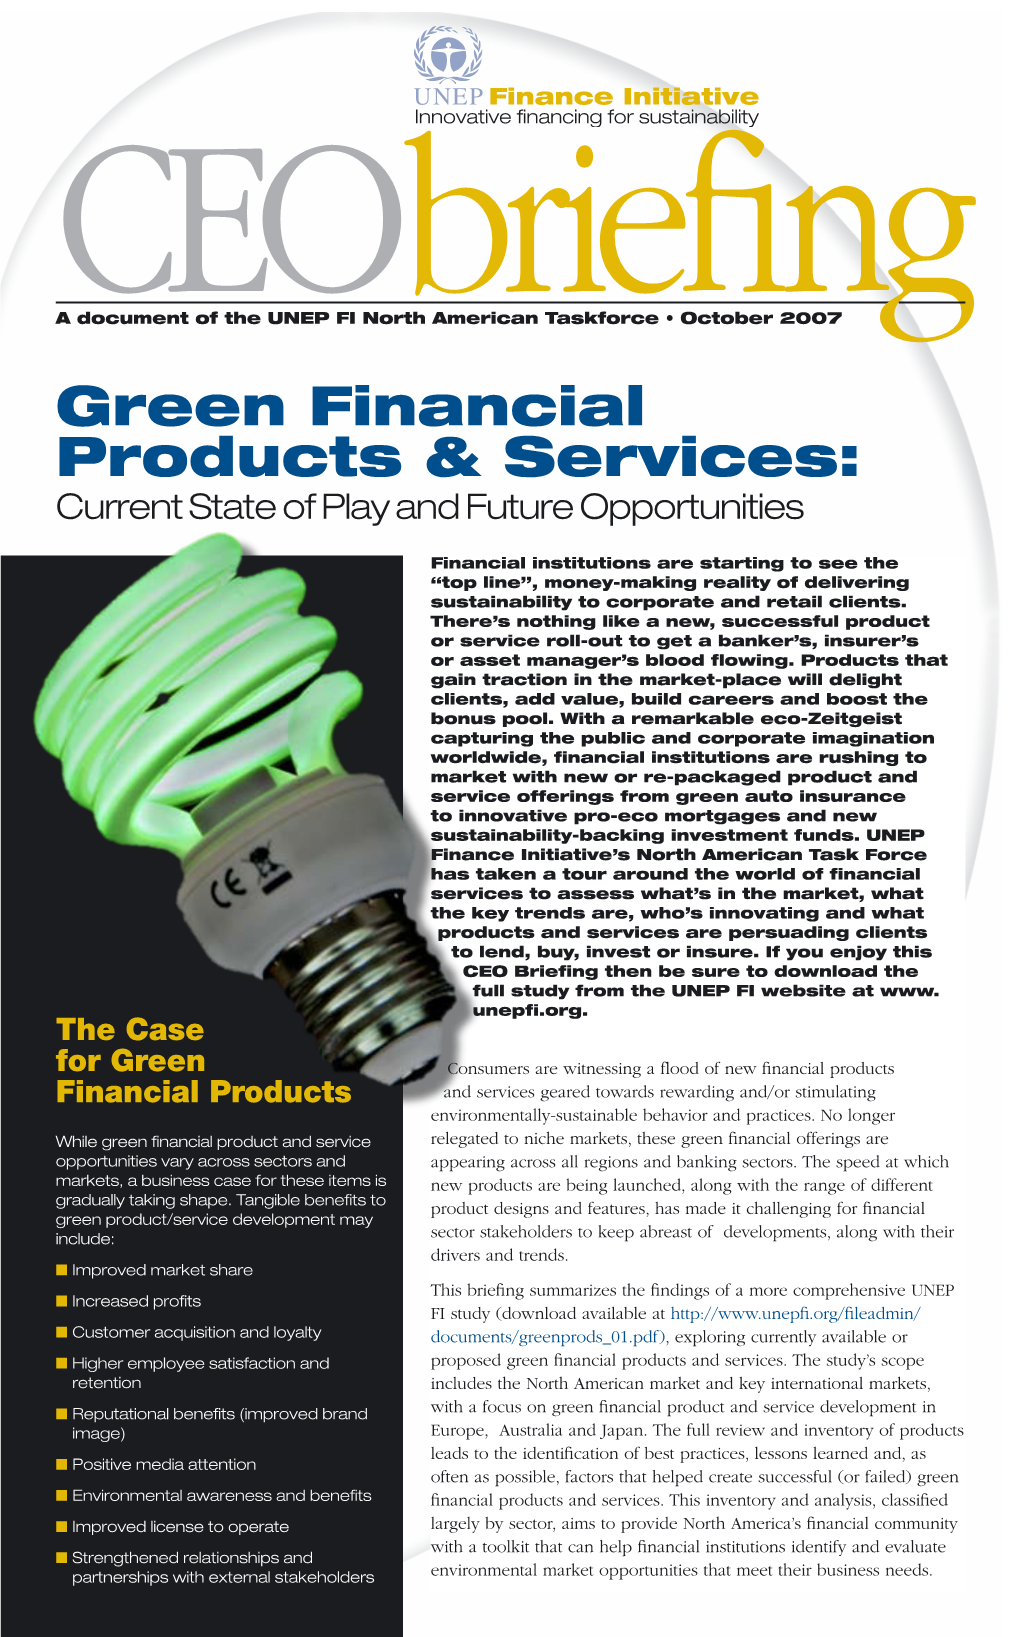 Green Financial Products & Services